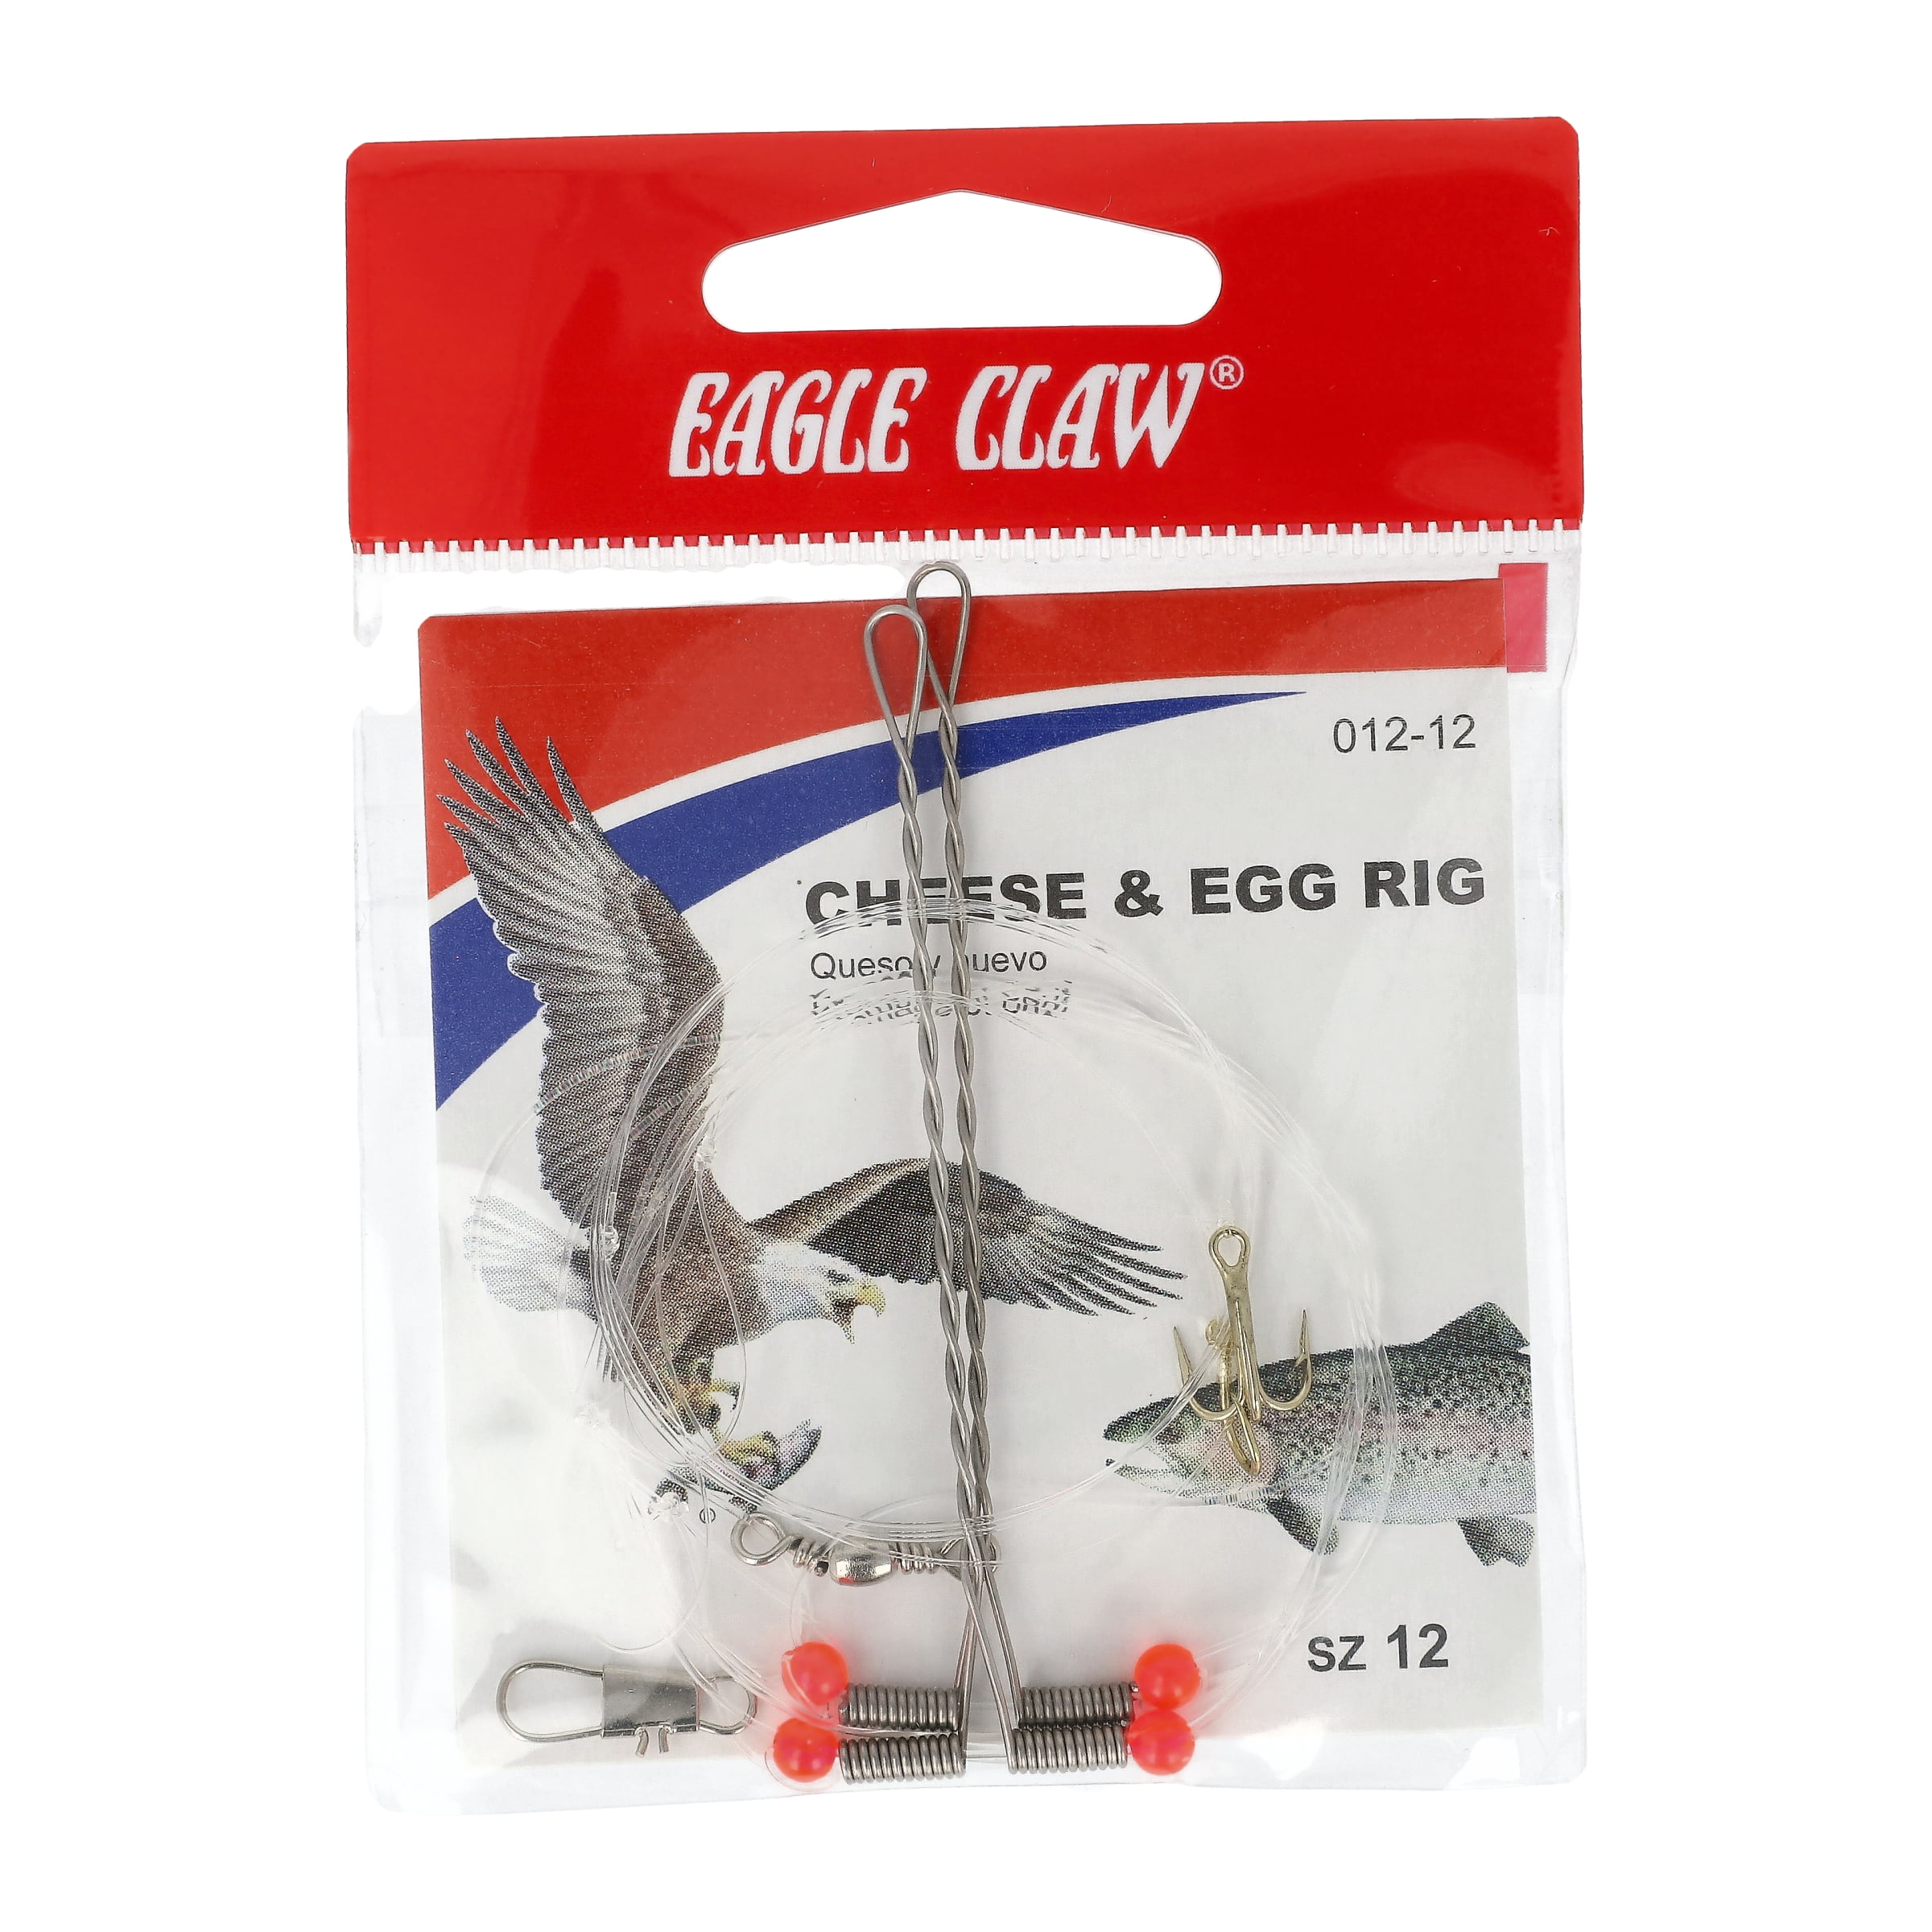 Eagle Claw Snelled Salmon-Egg Hook Assortment